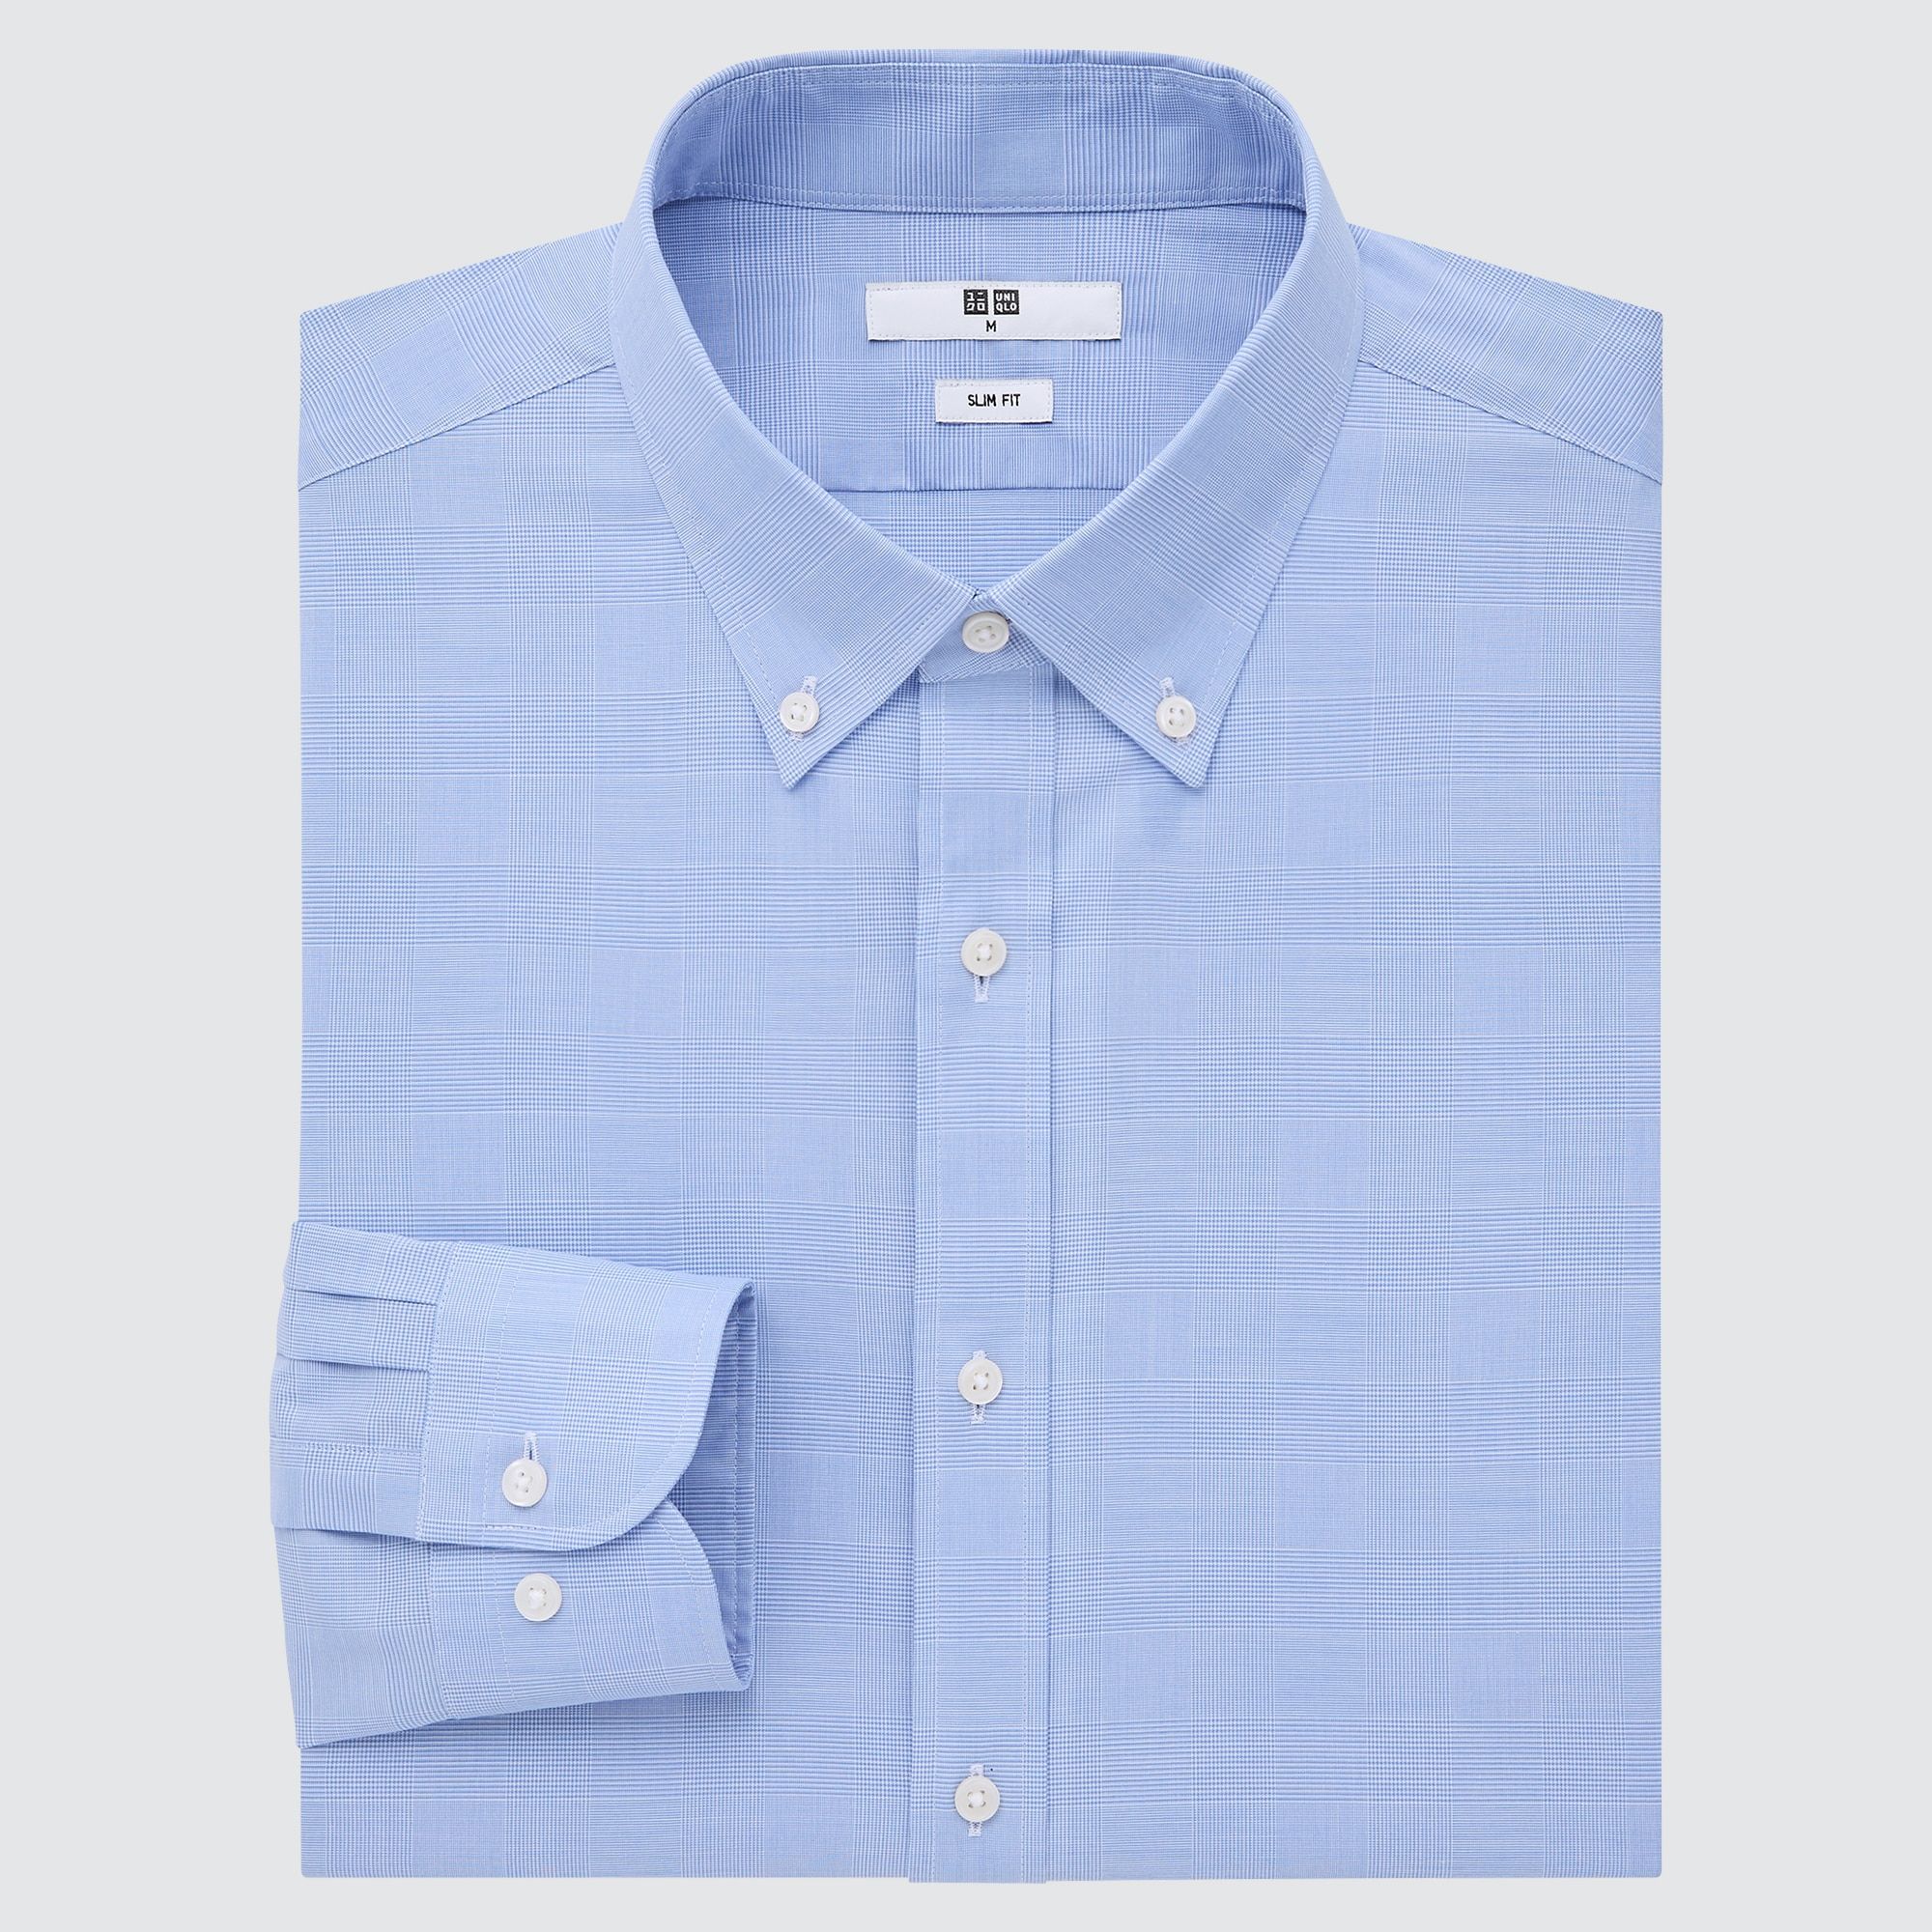  Uniqlo Easy Care Checked Stretch Long Sleeve Shirt - Blue (Slim Fit) 